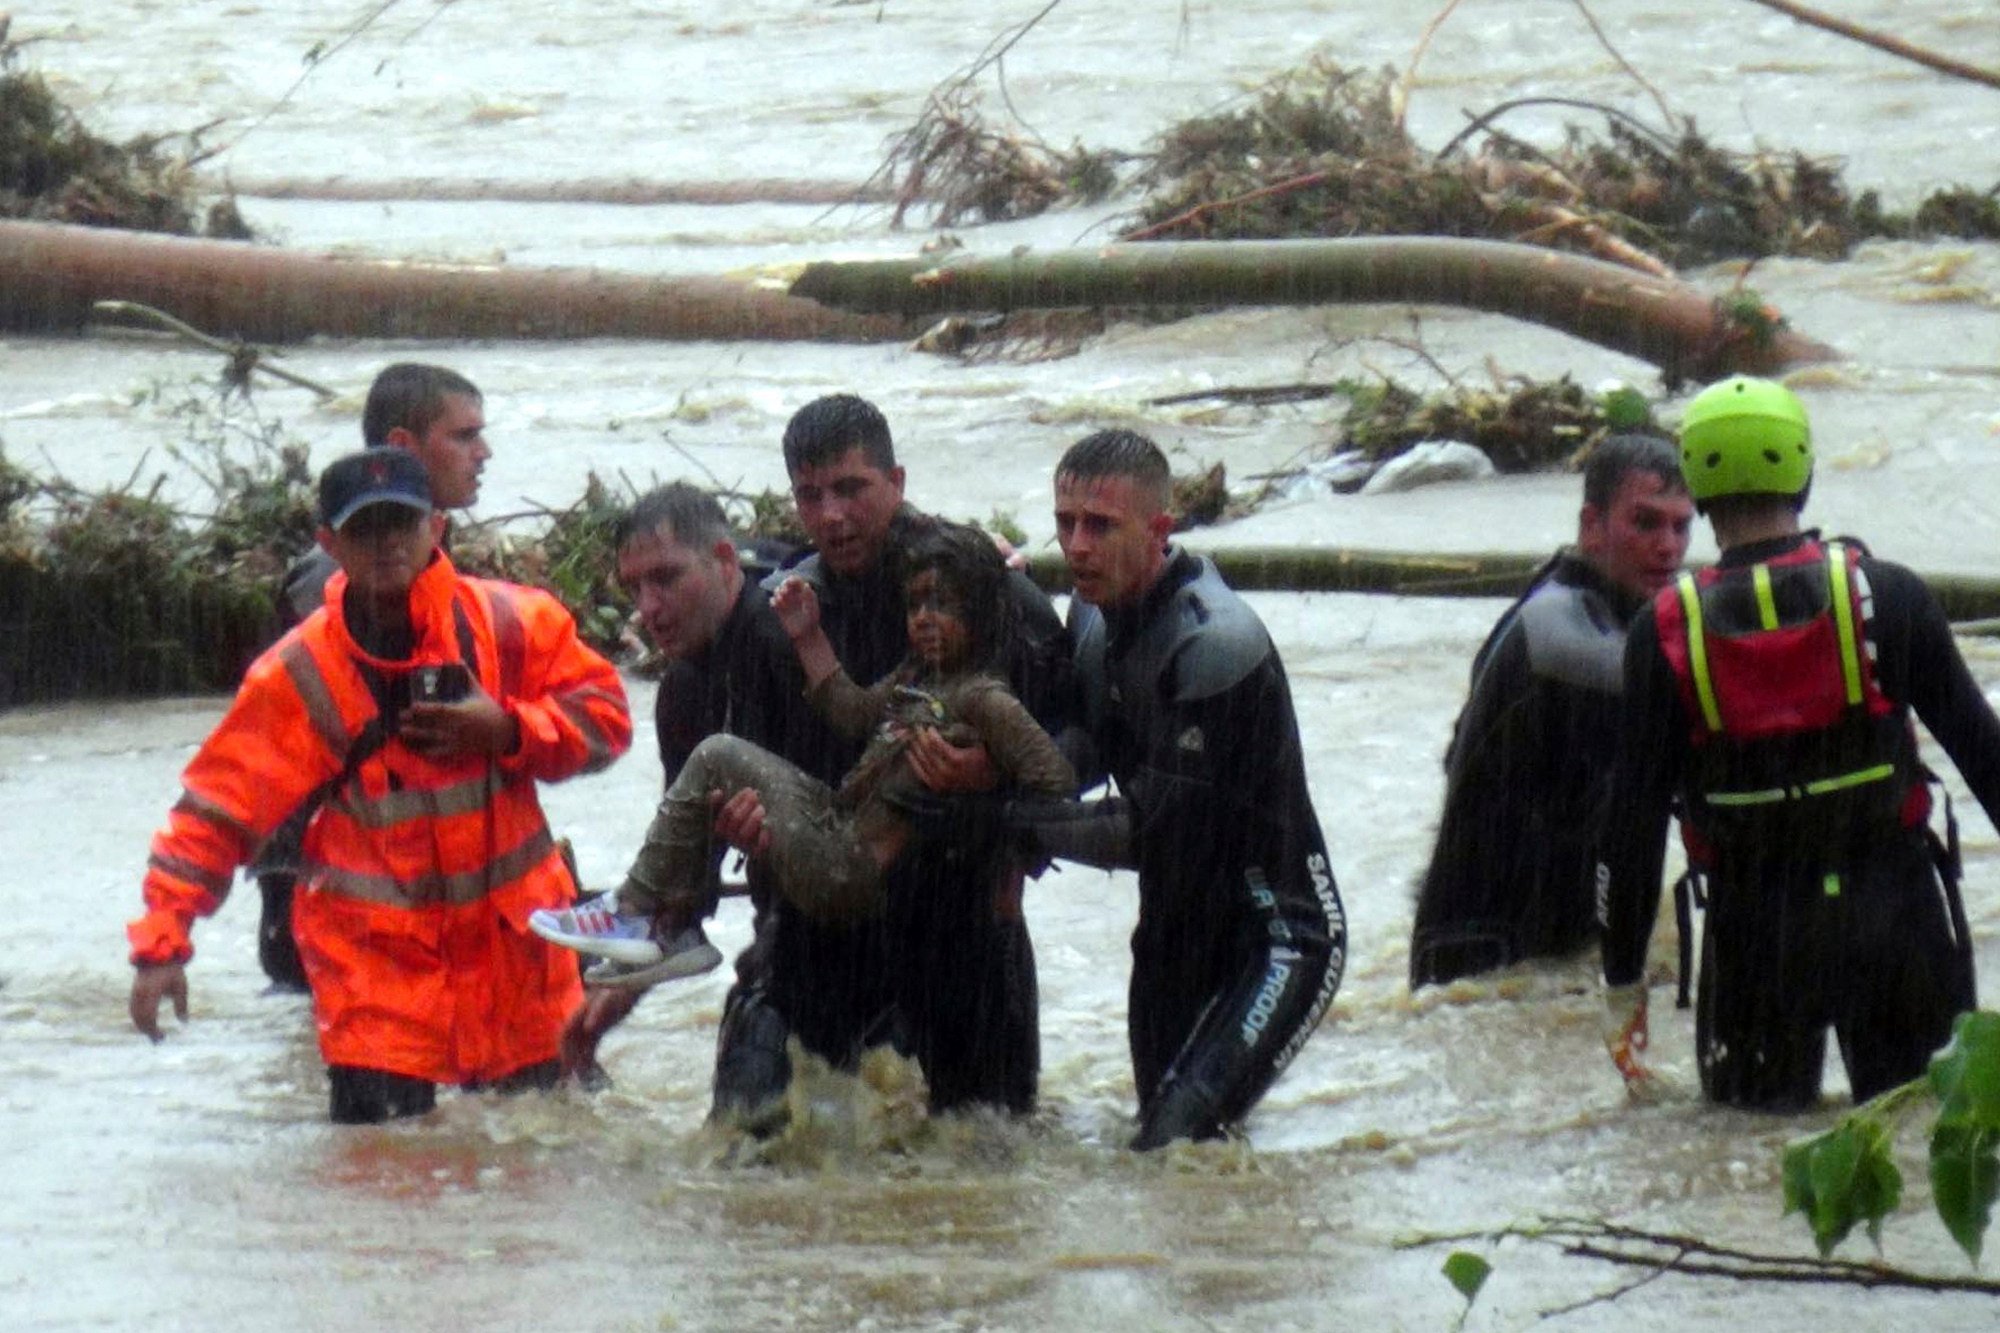 Emergency workers rescue a young girl during floods in a campsite in Kirklareli province, Turkey on Tuesday. Photo: Dia Images via AP